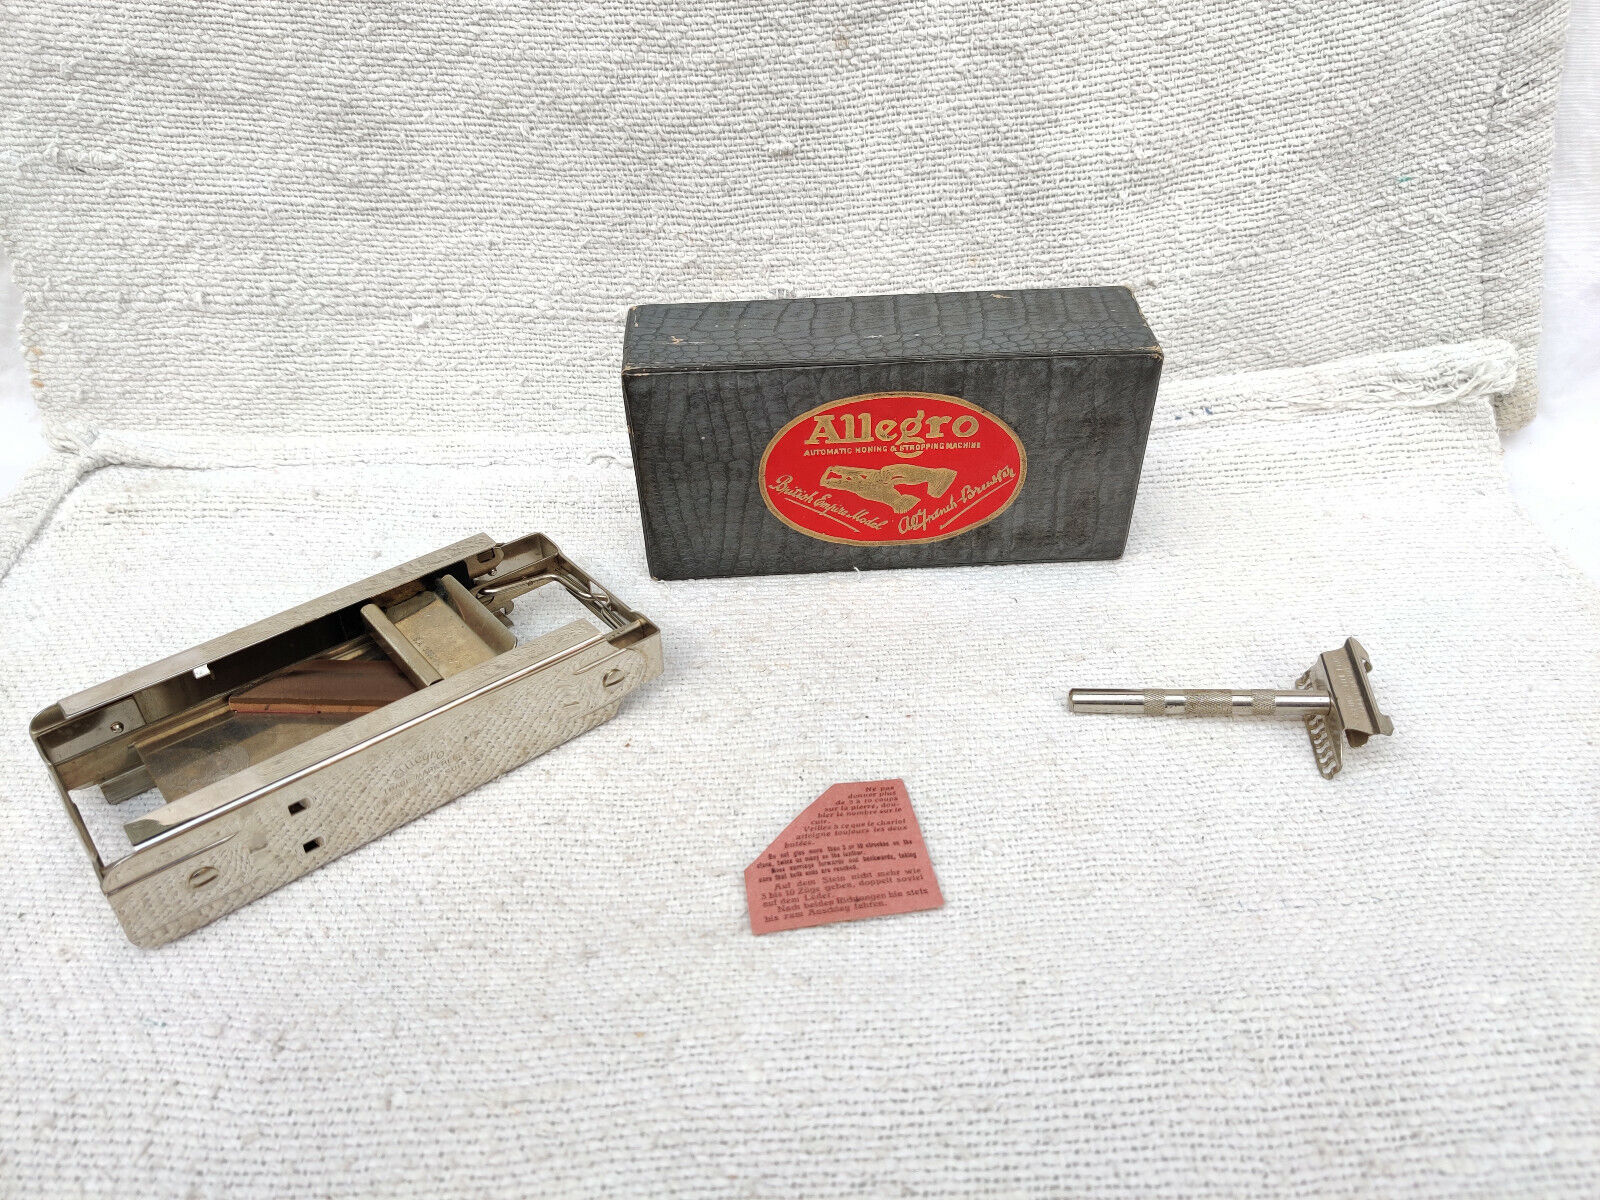 Antique Allegro Automatic Honing Stropping Machine In Original Box Collectible